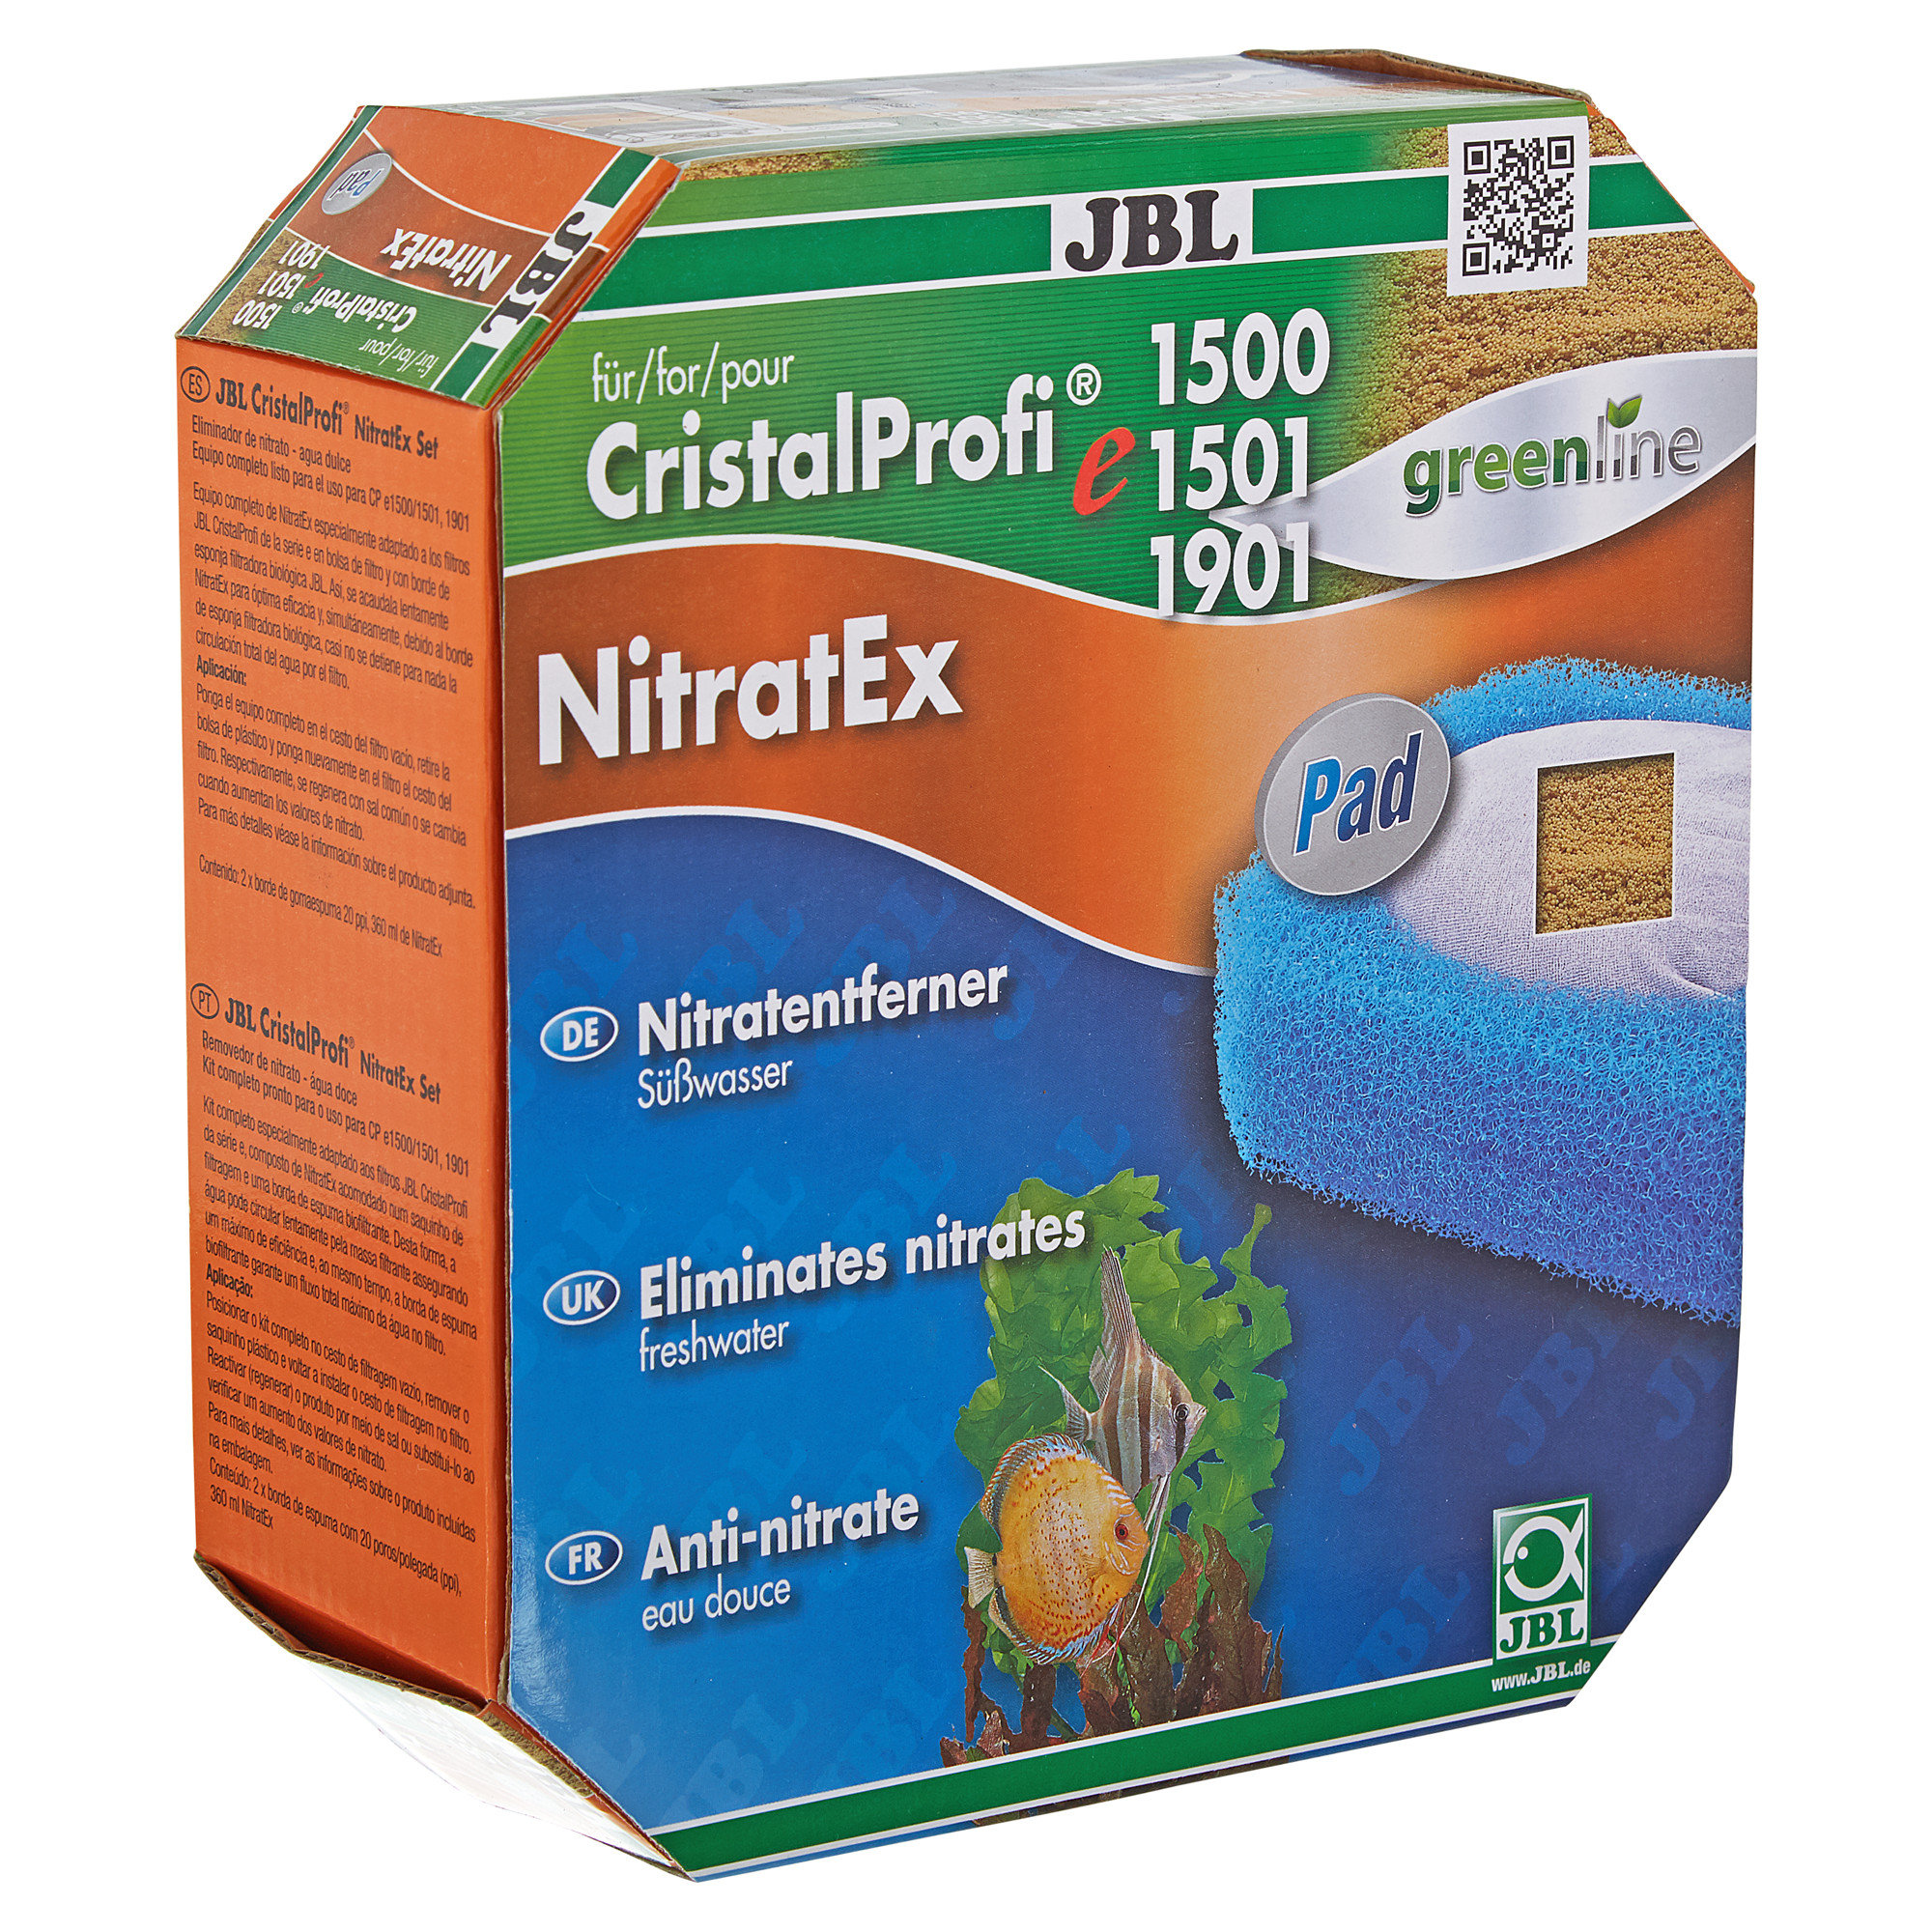 Nitratentferner-Set "NitratEx" e1500/1501, 1901 + product picture